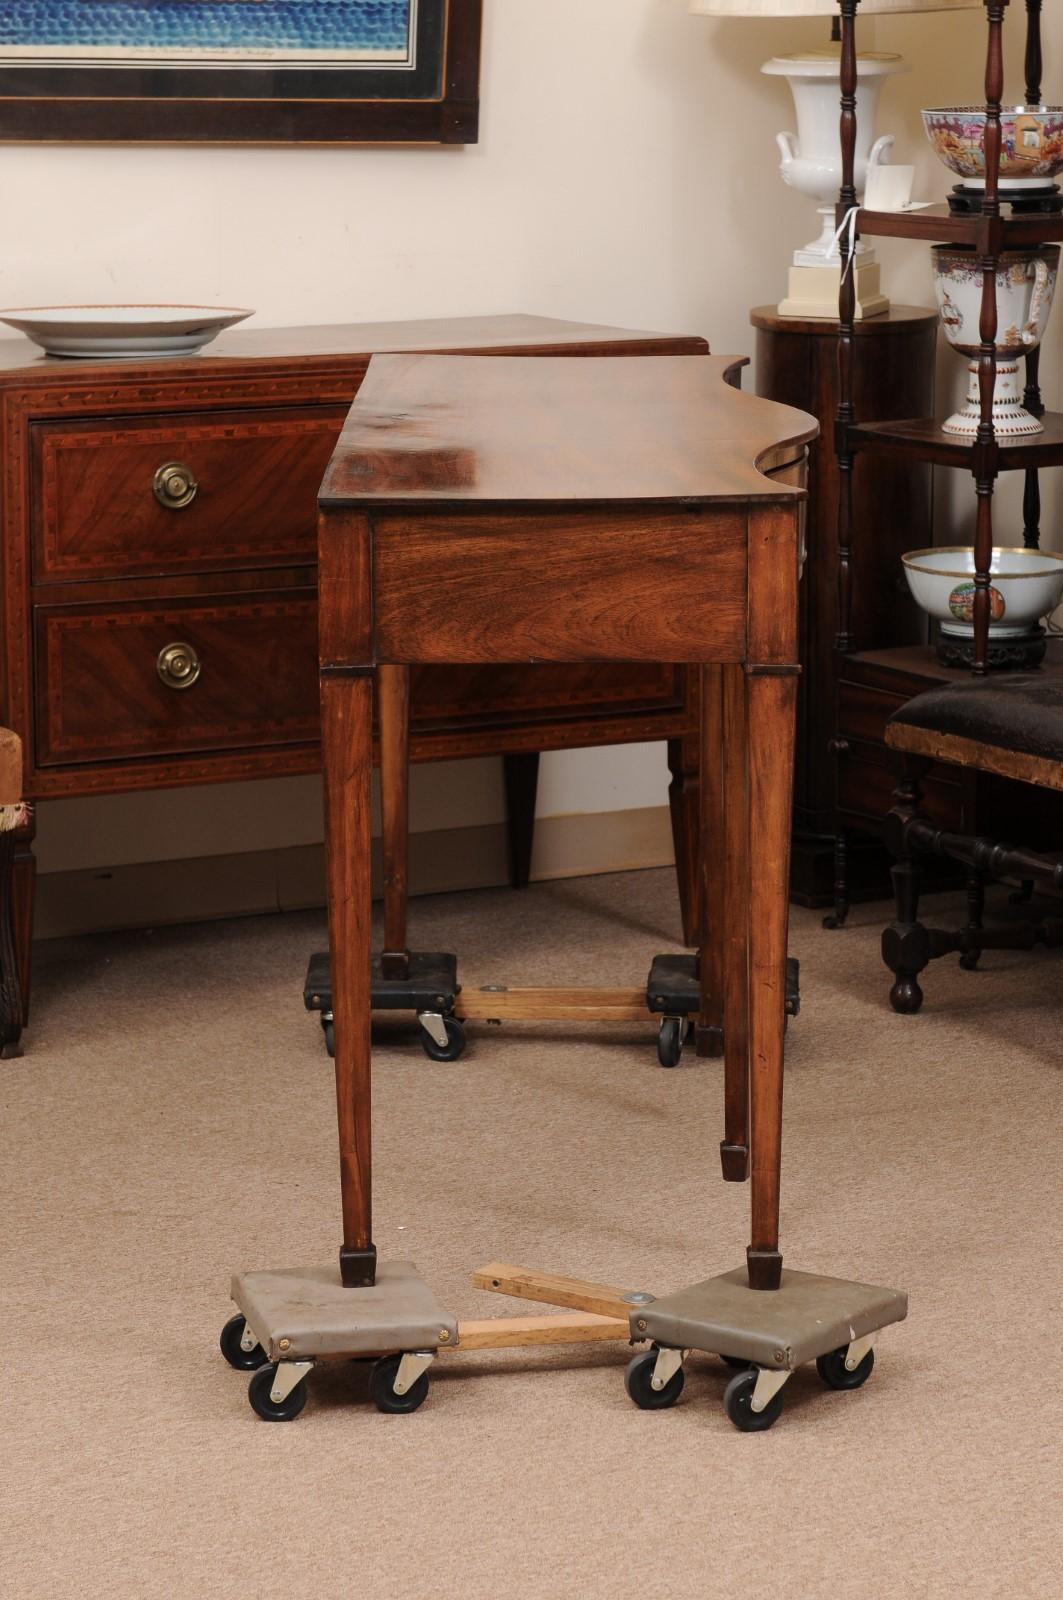 19th Century Mahogany Serving Serpentine Table with 3 Drawers For Sale 5